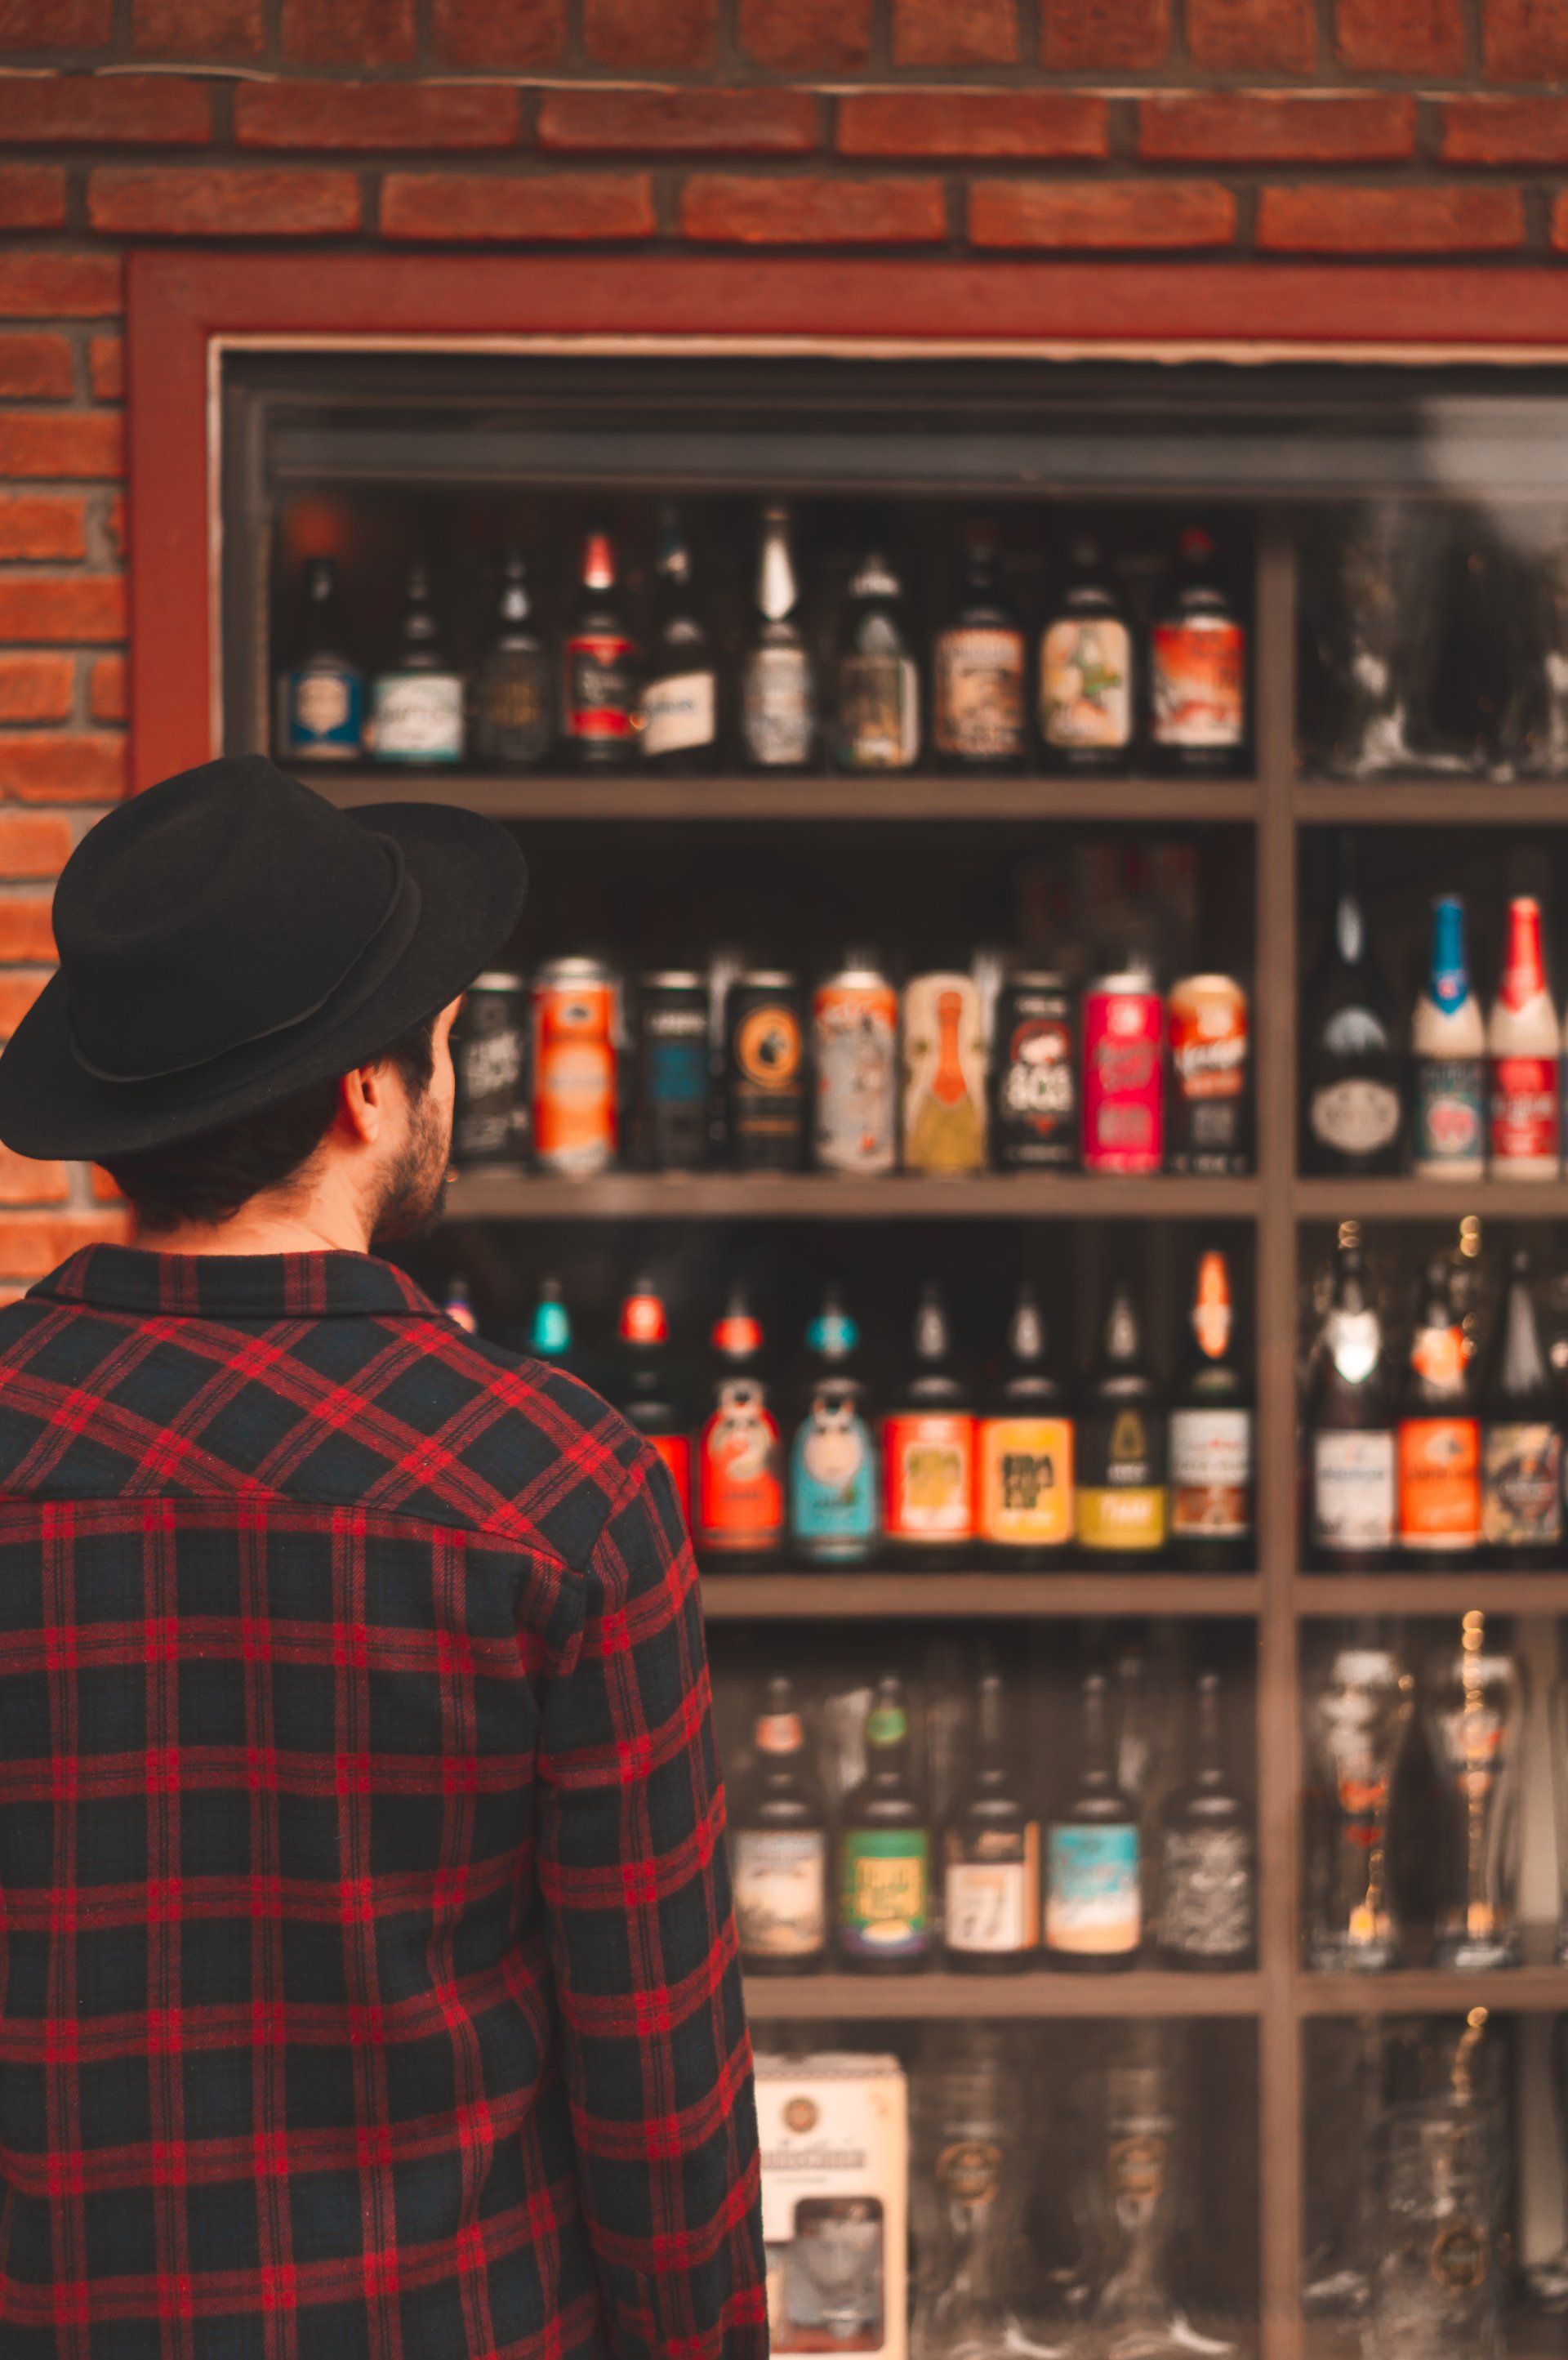 A man is standing in front of a shelf full of beer bottles.